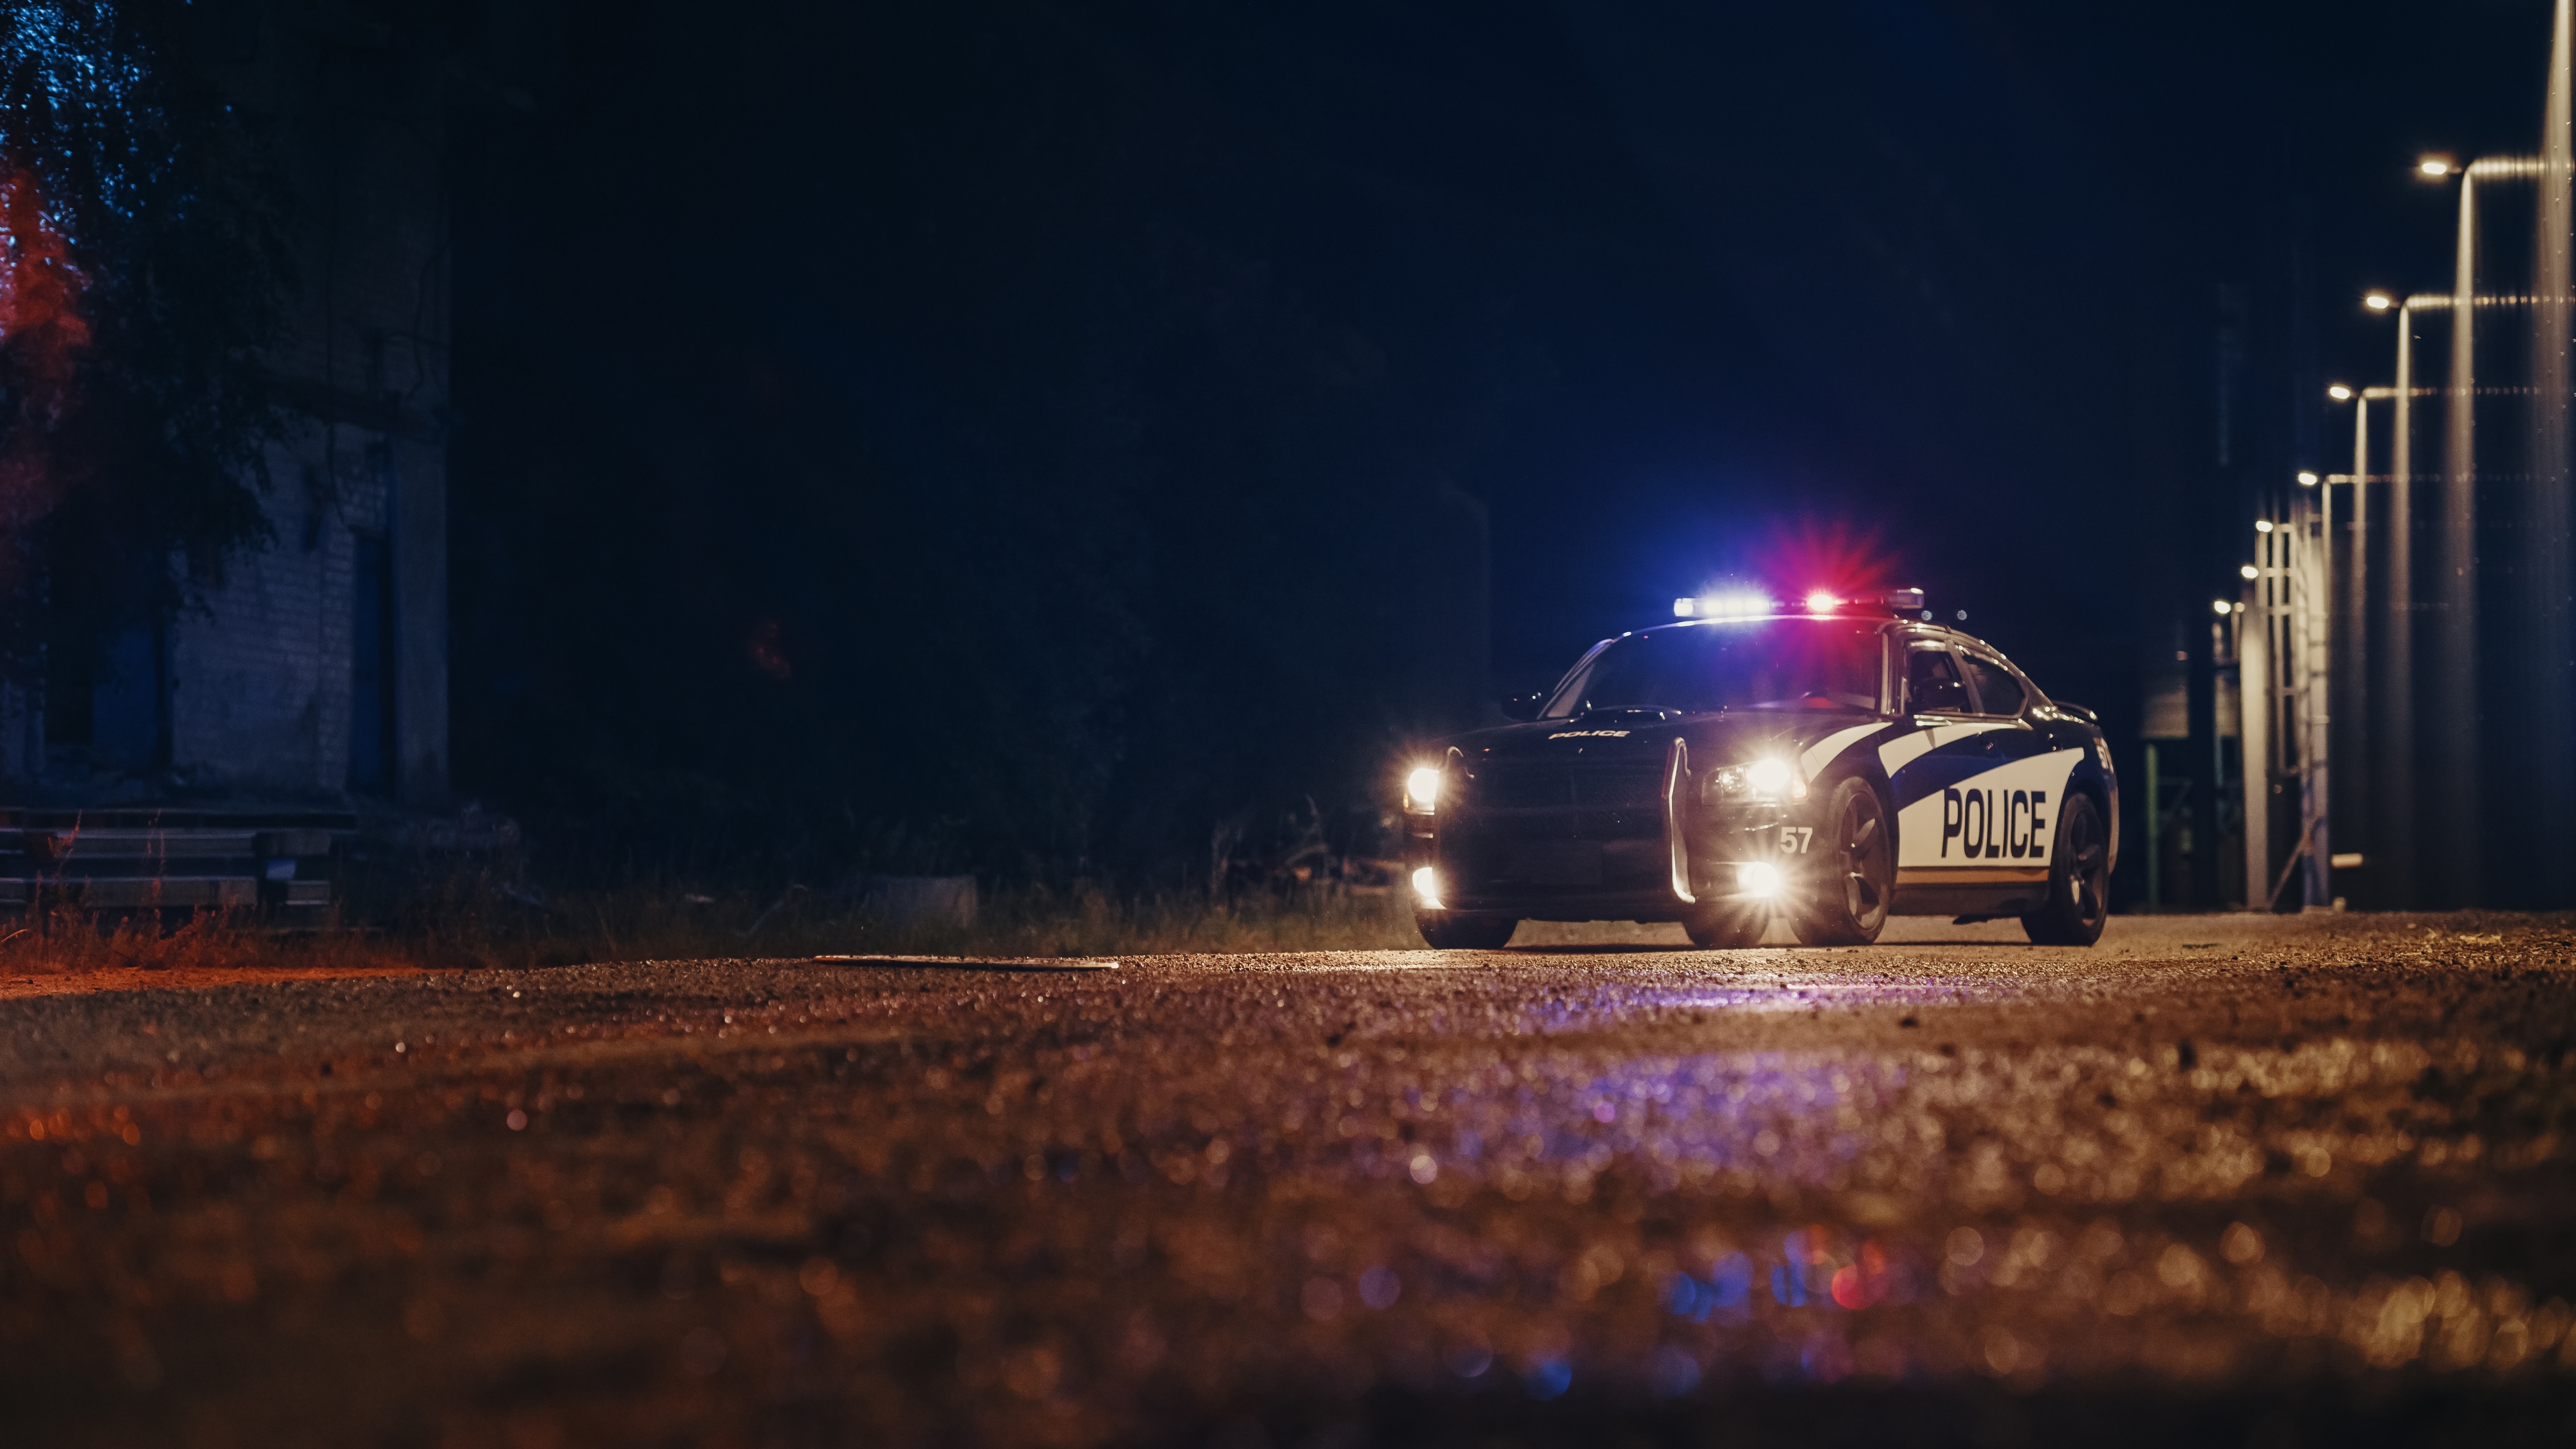 A police car on a road | Source: Shutterstock